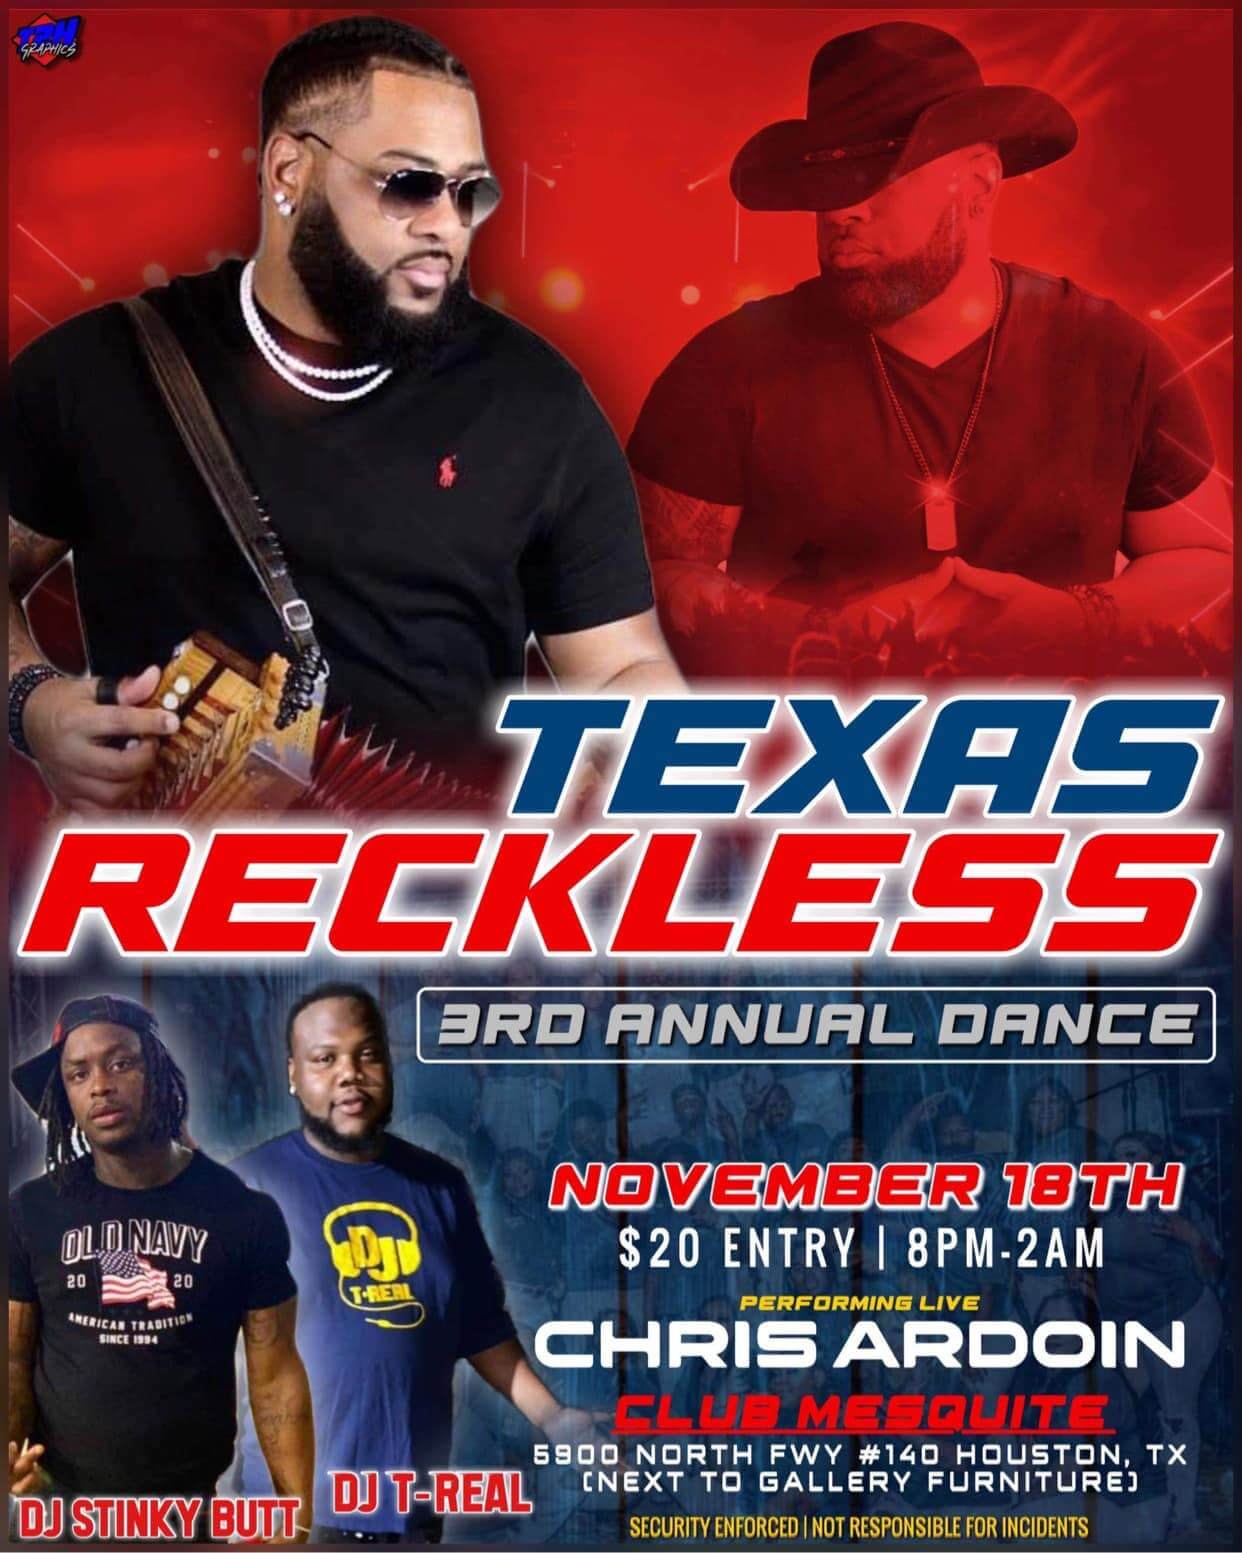 Texas Reckless 3rd Annual Dance- Zydeco Events